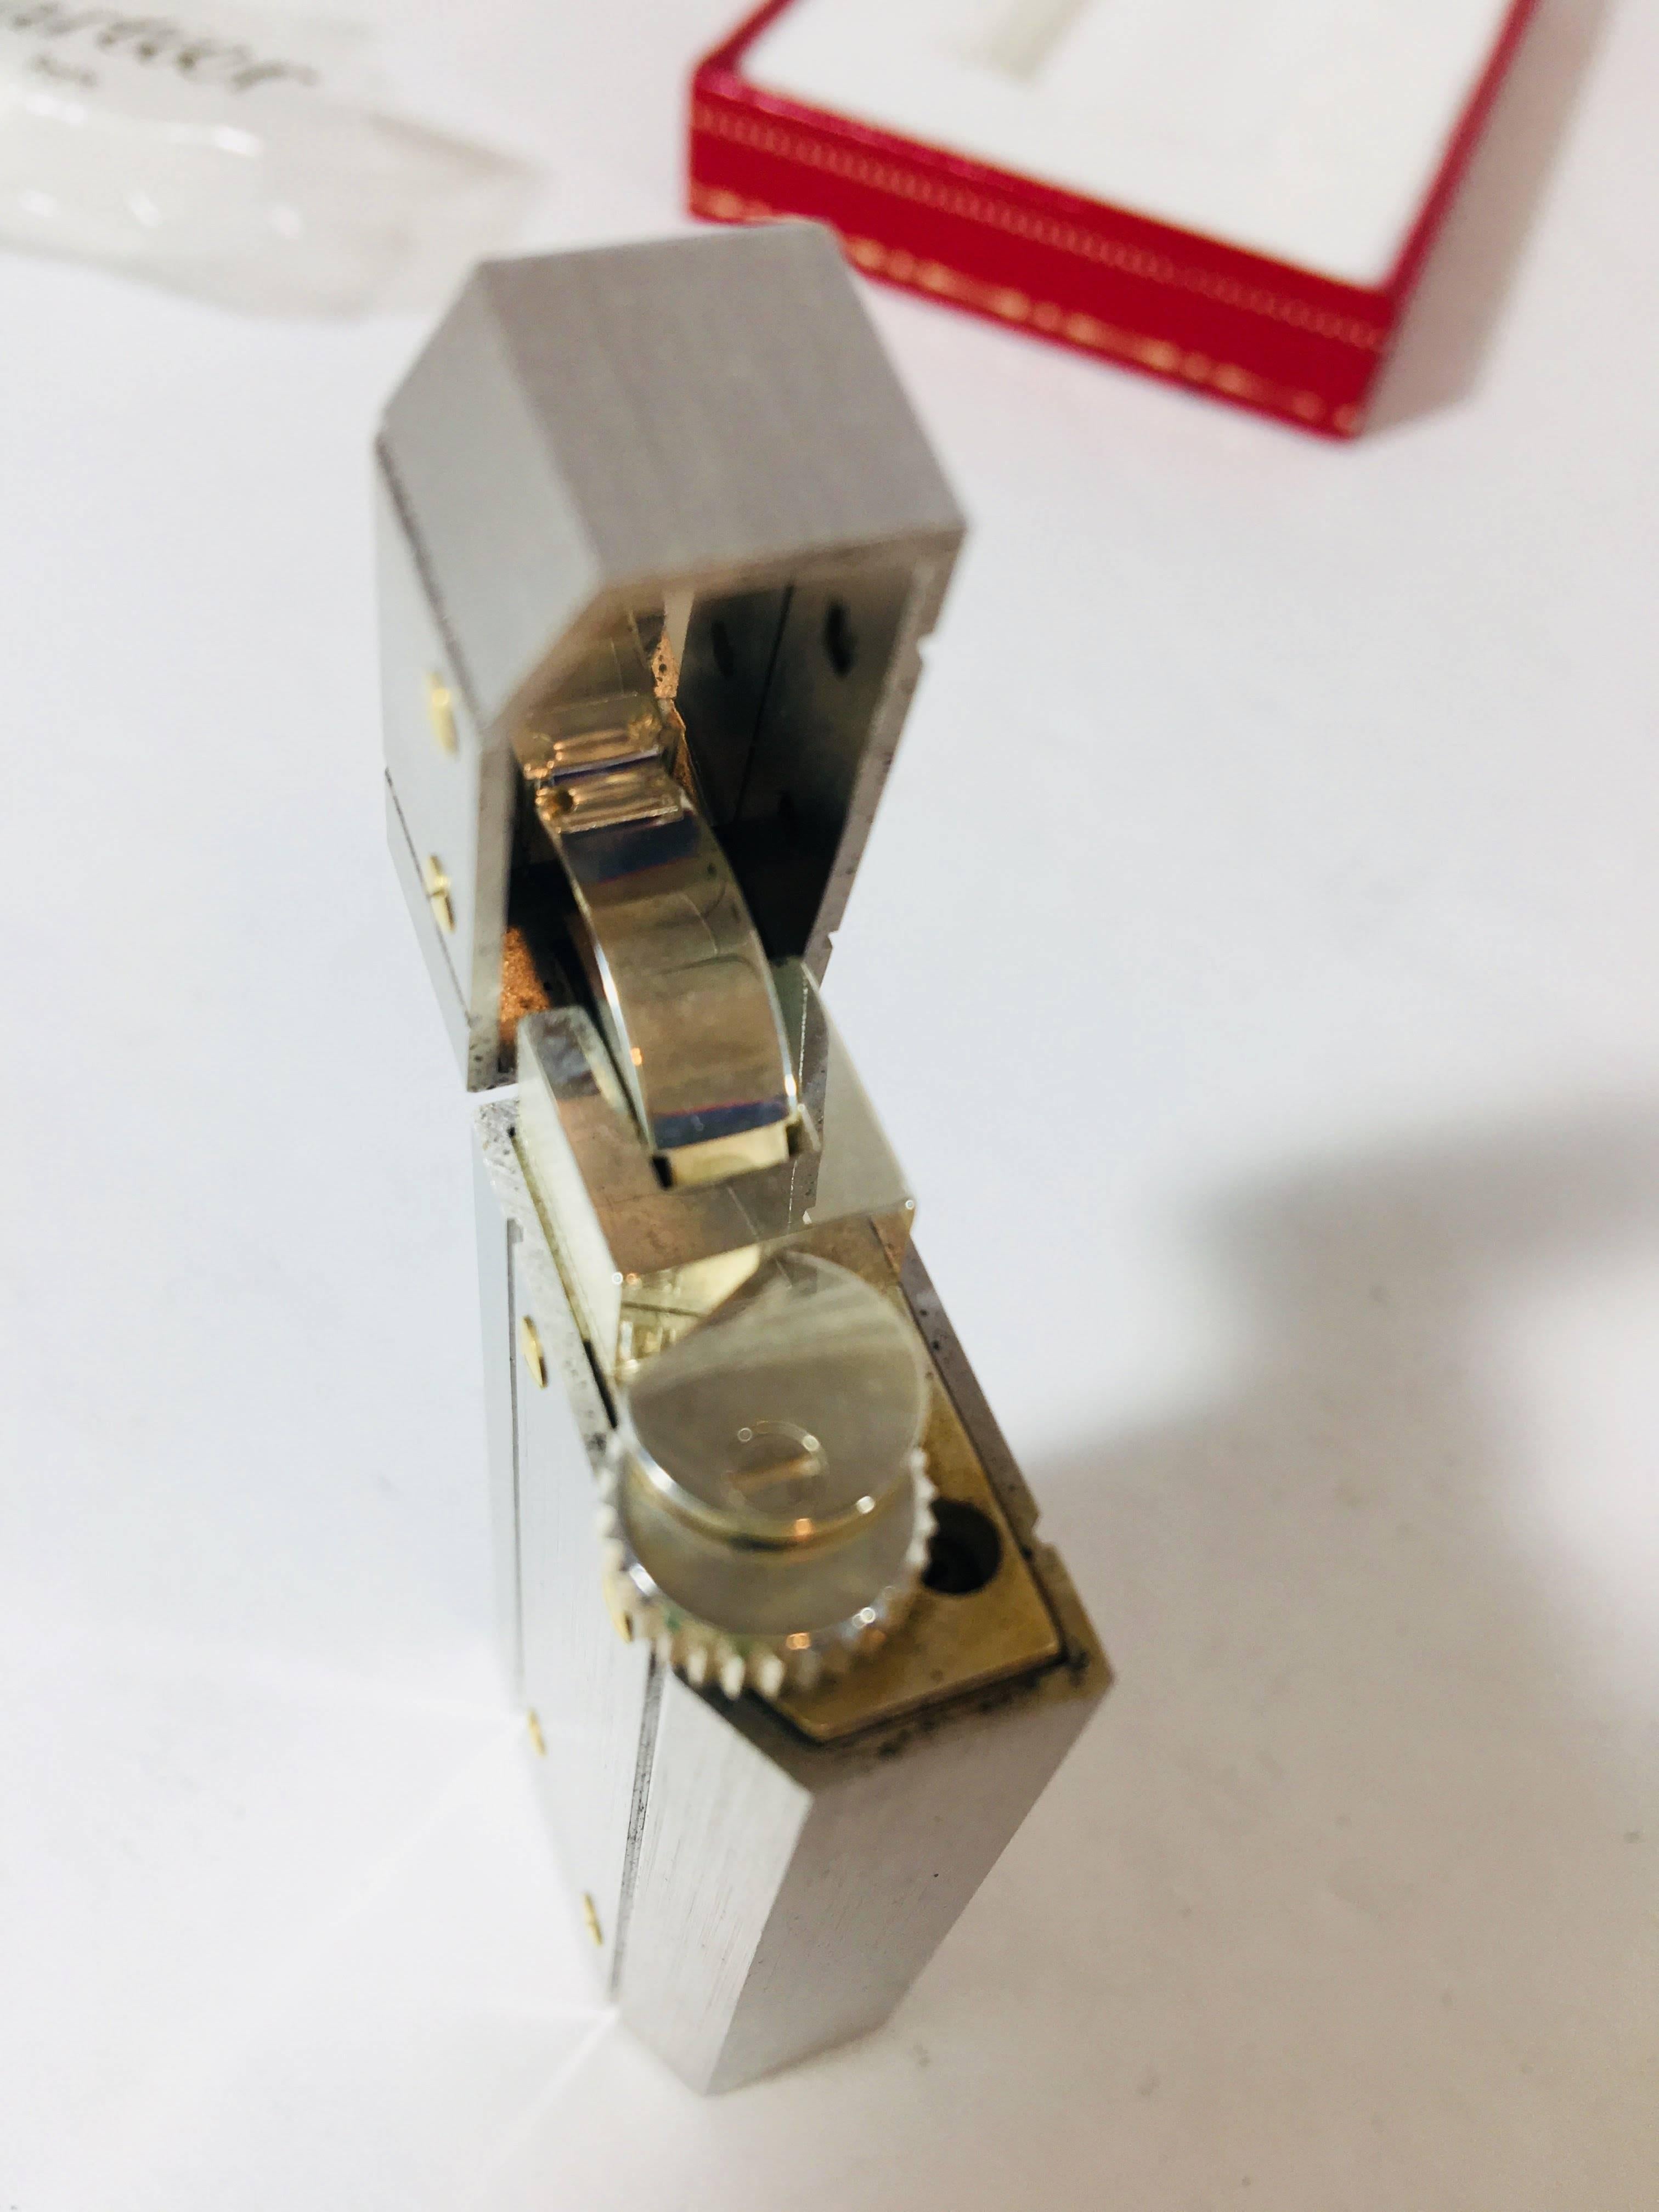 Cartier Silver Lighter with Gold Screws.